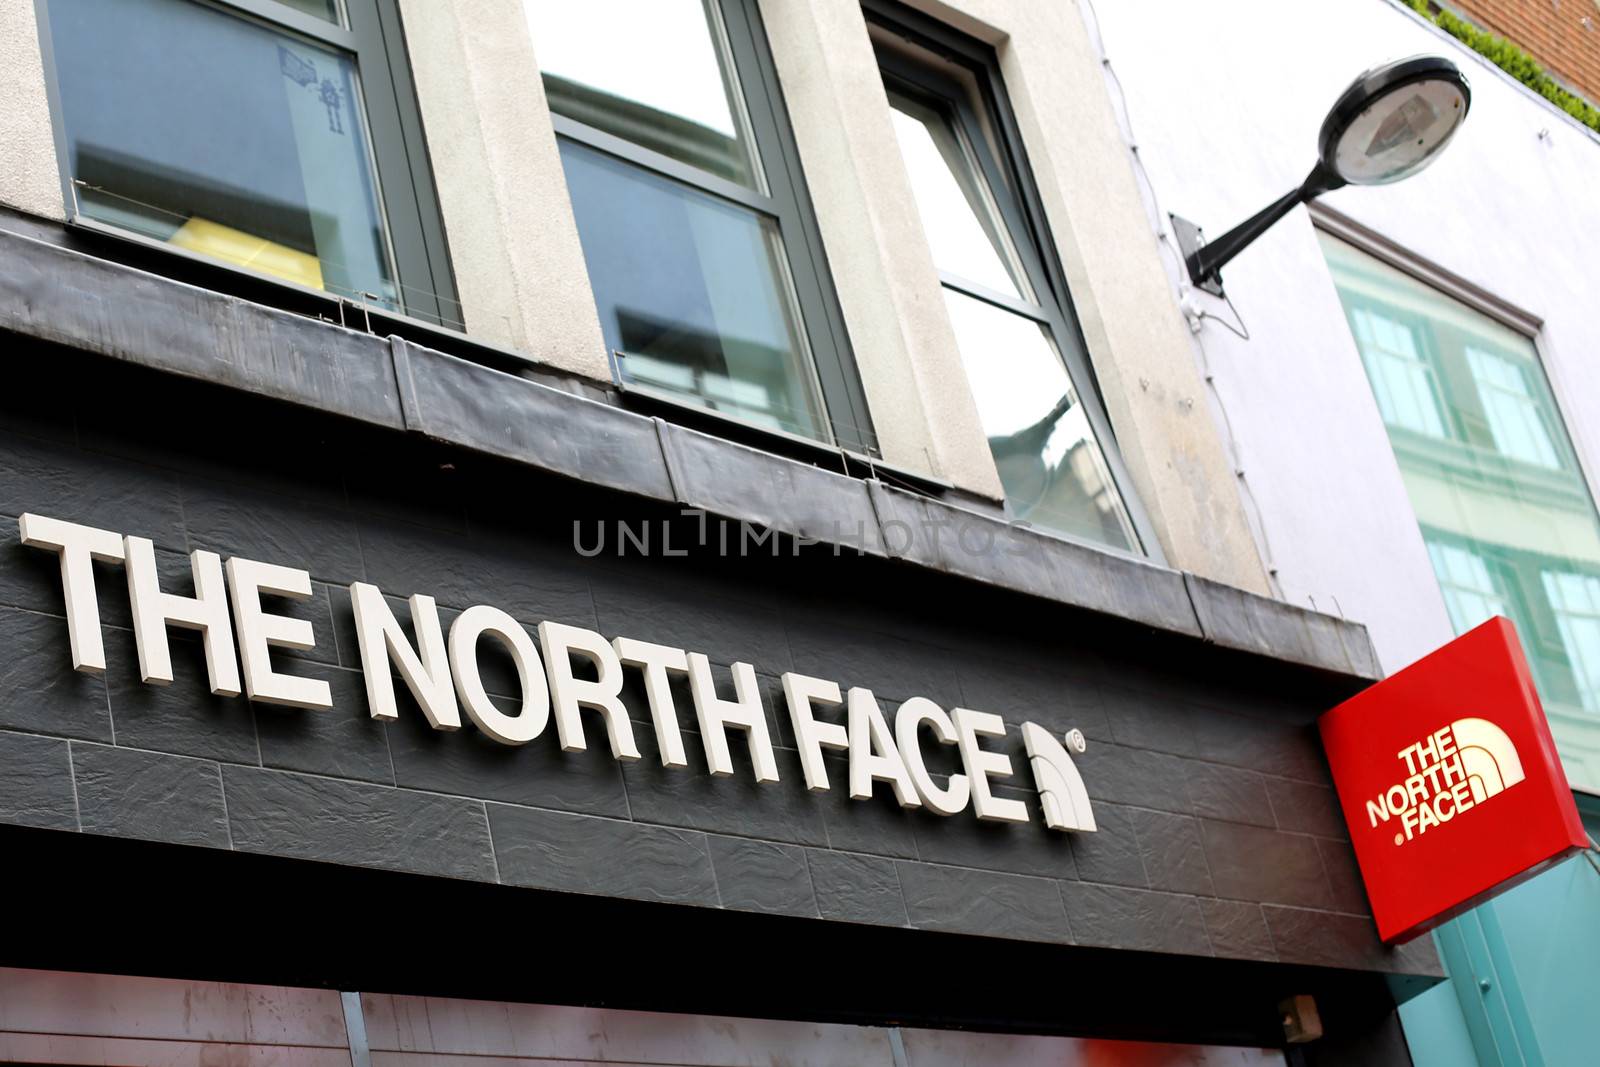 The North Face Shop Sign Carnaby Street London by Whiteboxmedia